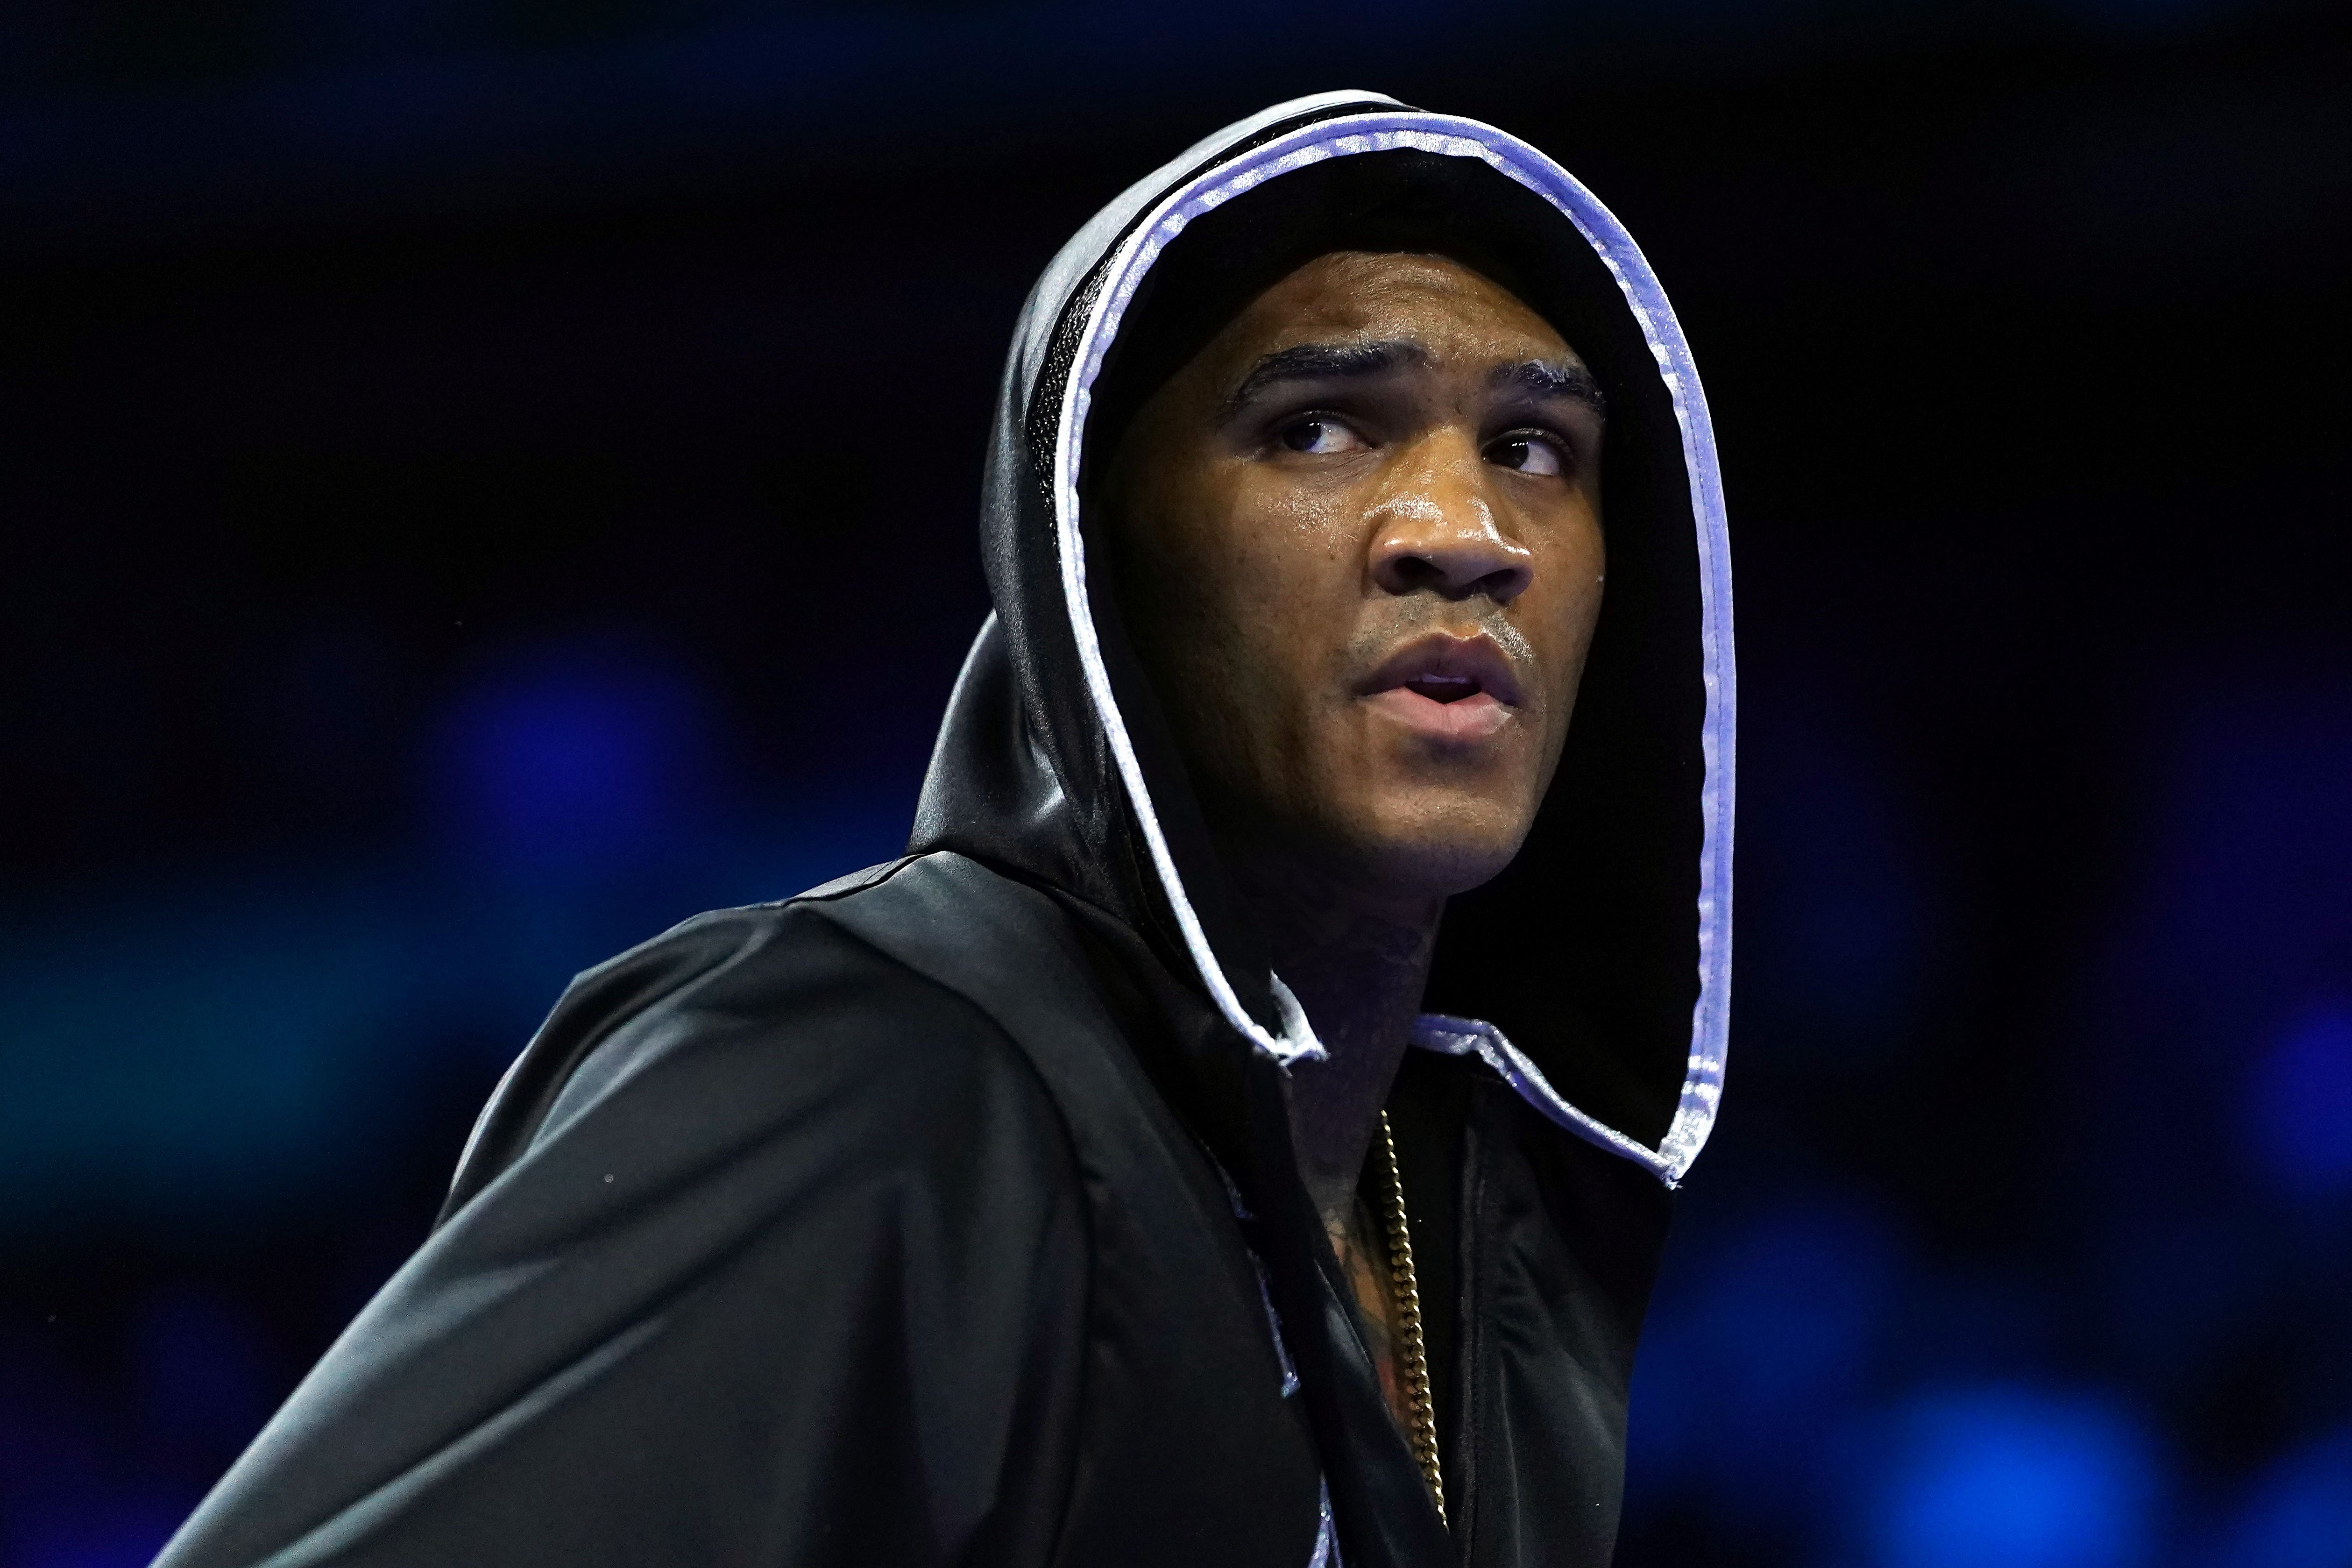 UKAD appealed against lifting Conor Benn’s provisional suspension